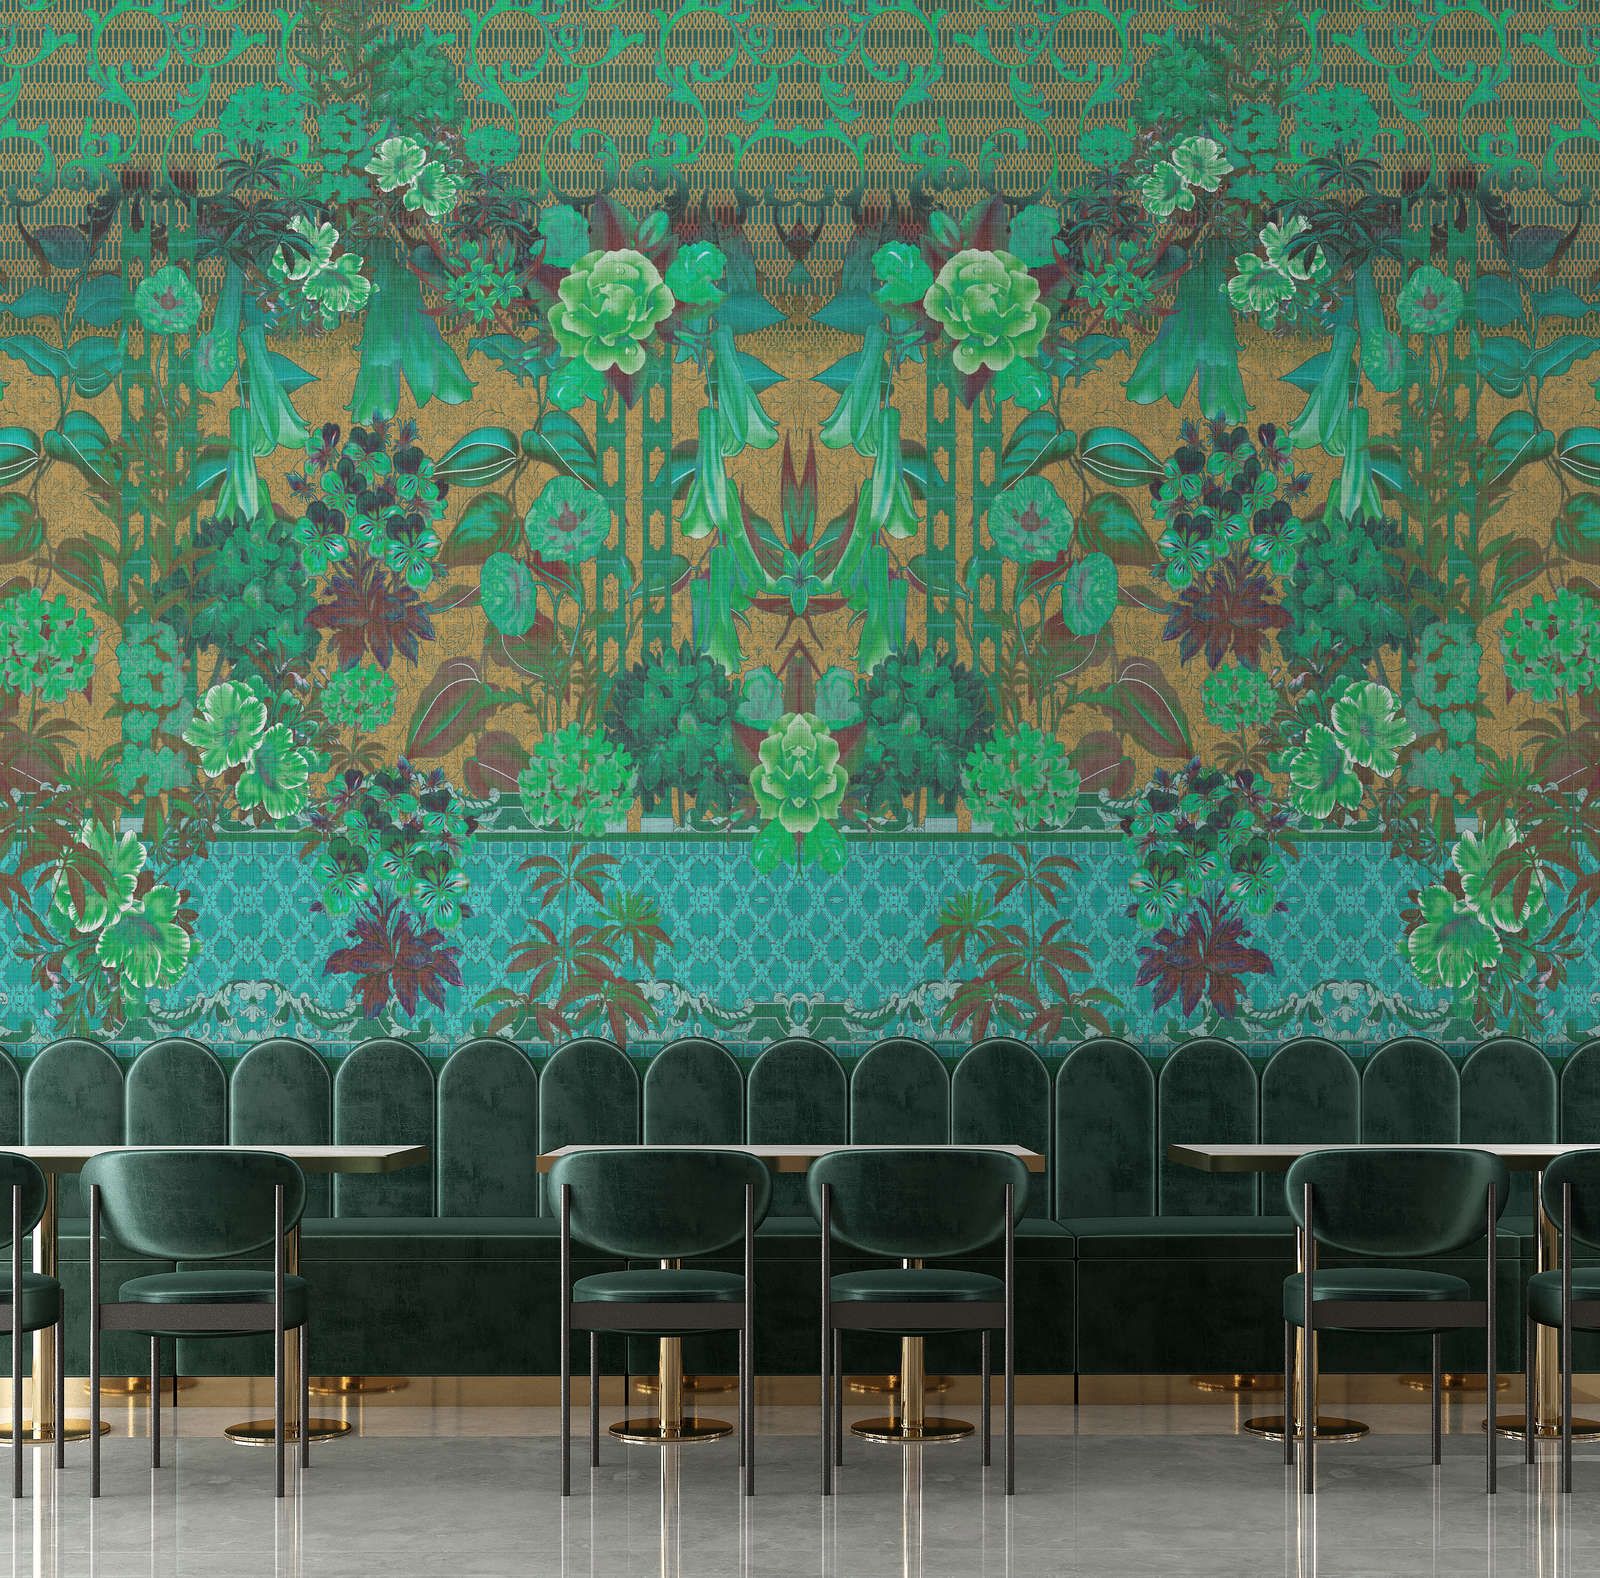             Photo wallpaper »sati 2« - Floral design & ornaments with linen structure look - Green | Smooth, slightly pearly shimmering non-woven fabric
        